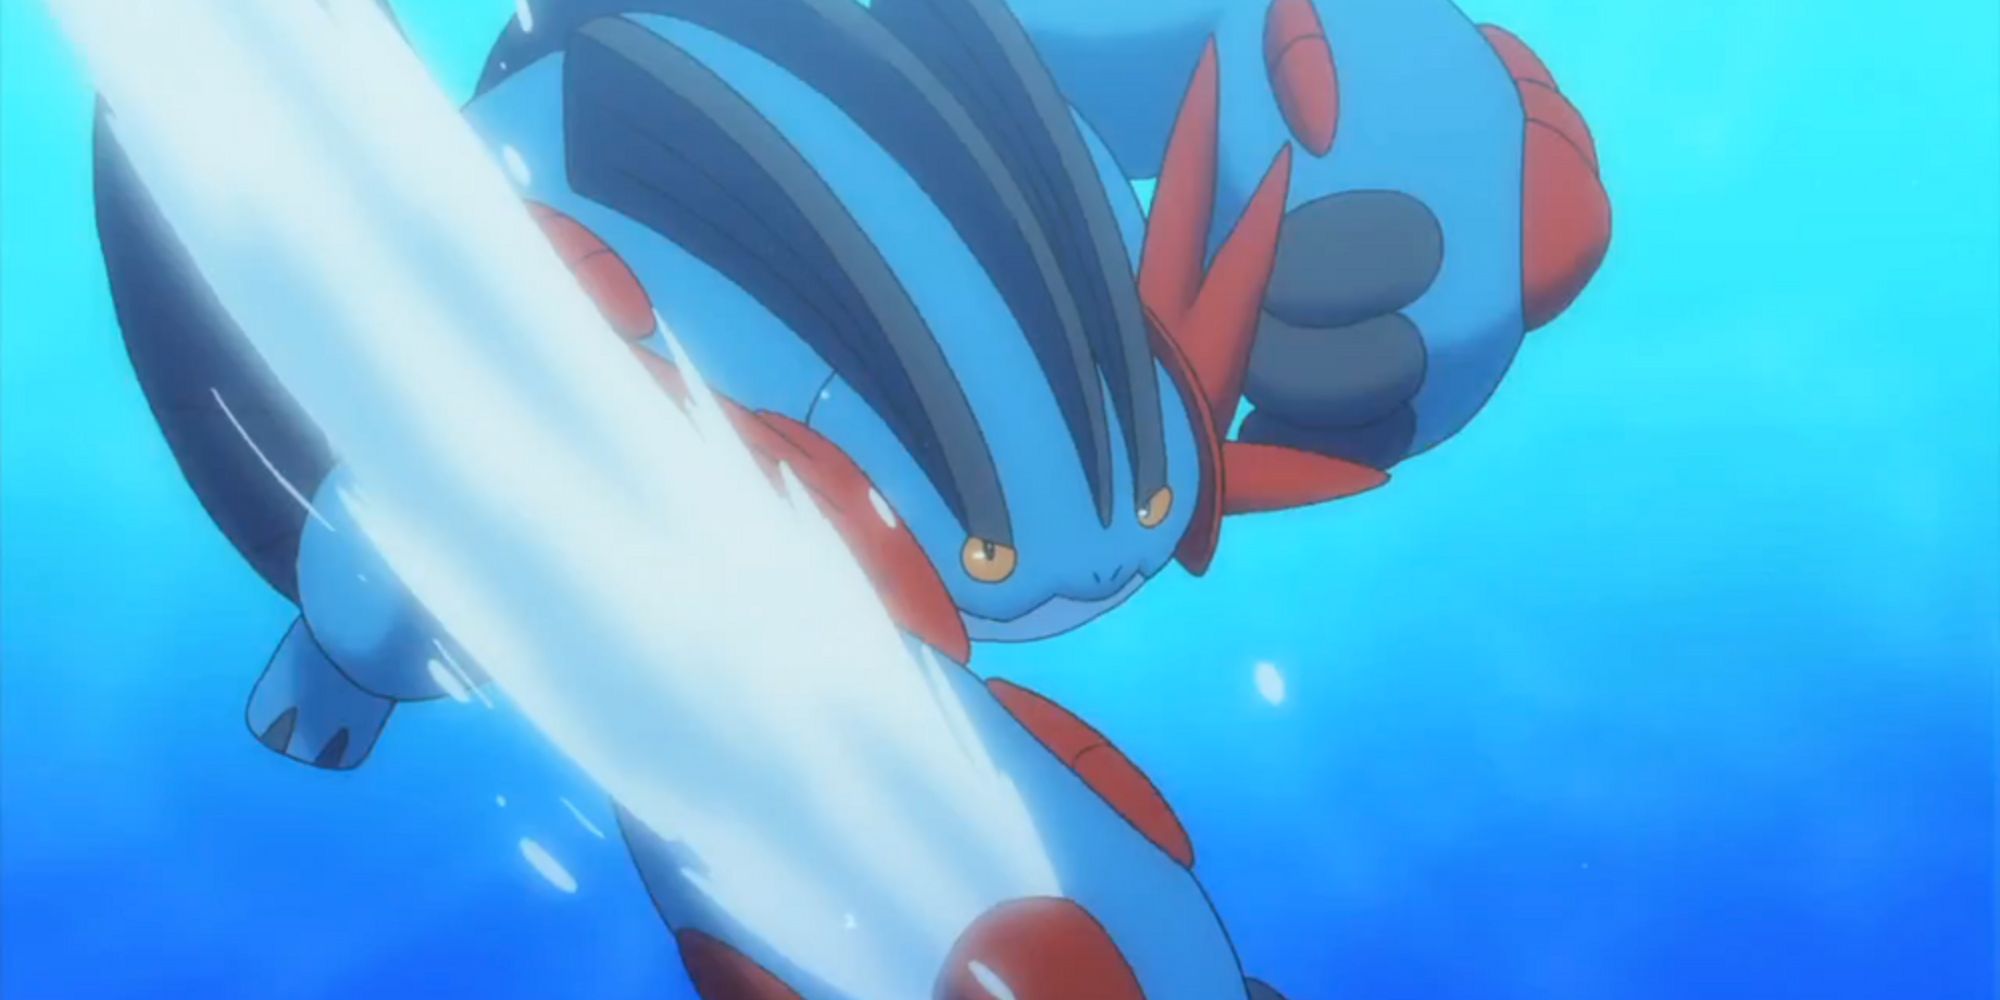 Mega Swampert slicing through water with its massive fist.